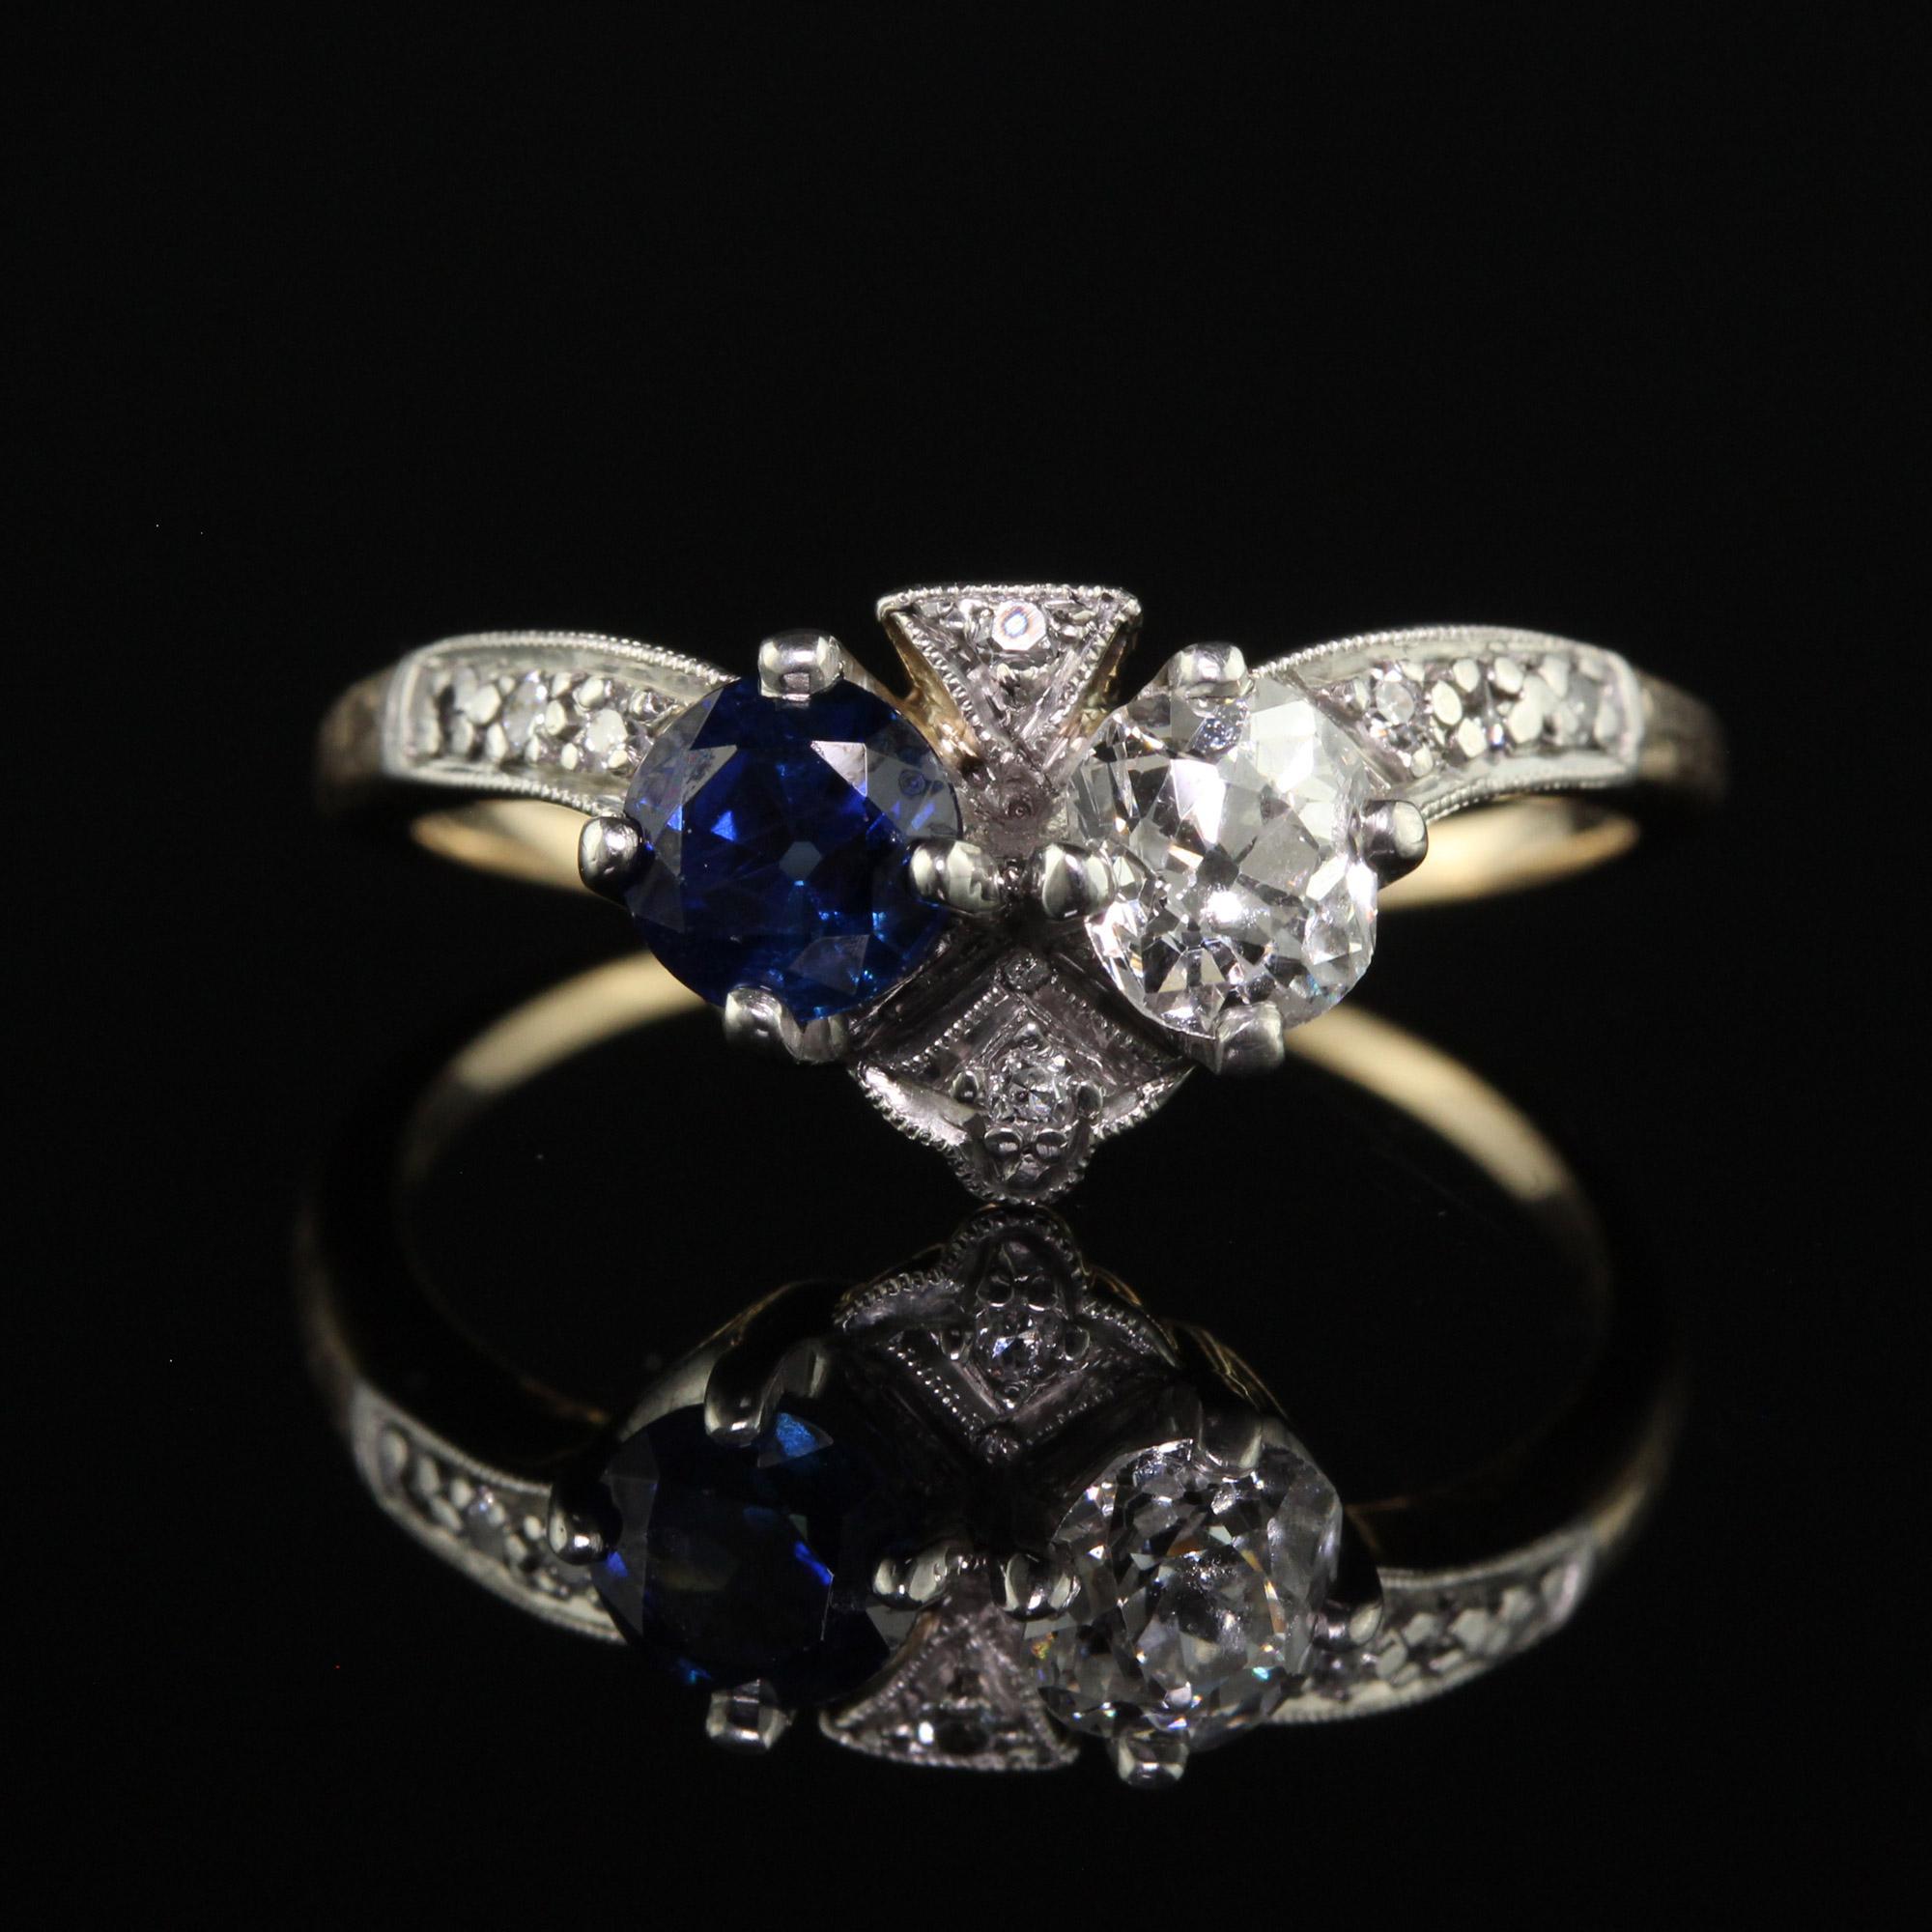 Antique Edwardian 14K Yellow Gold Platinum Old Euro Diamond and Sapphire Ring In Good Condition For Sale In Great Neck, NY